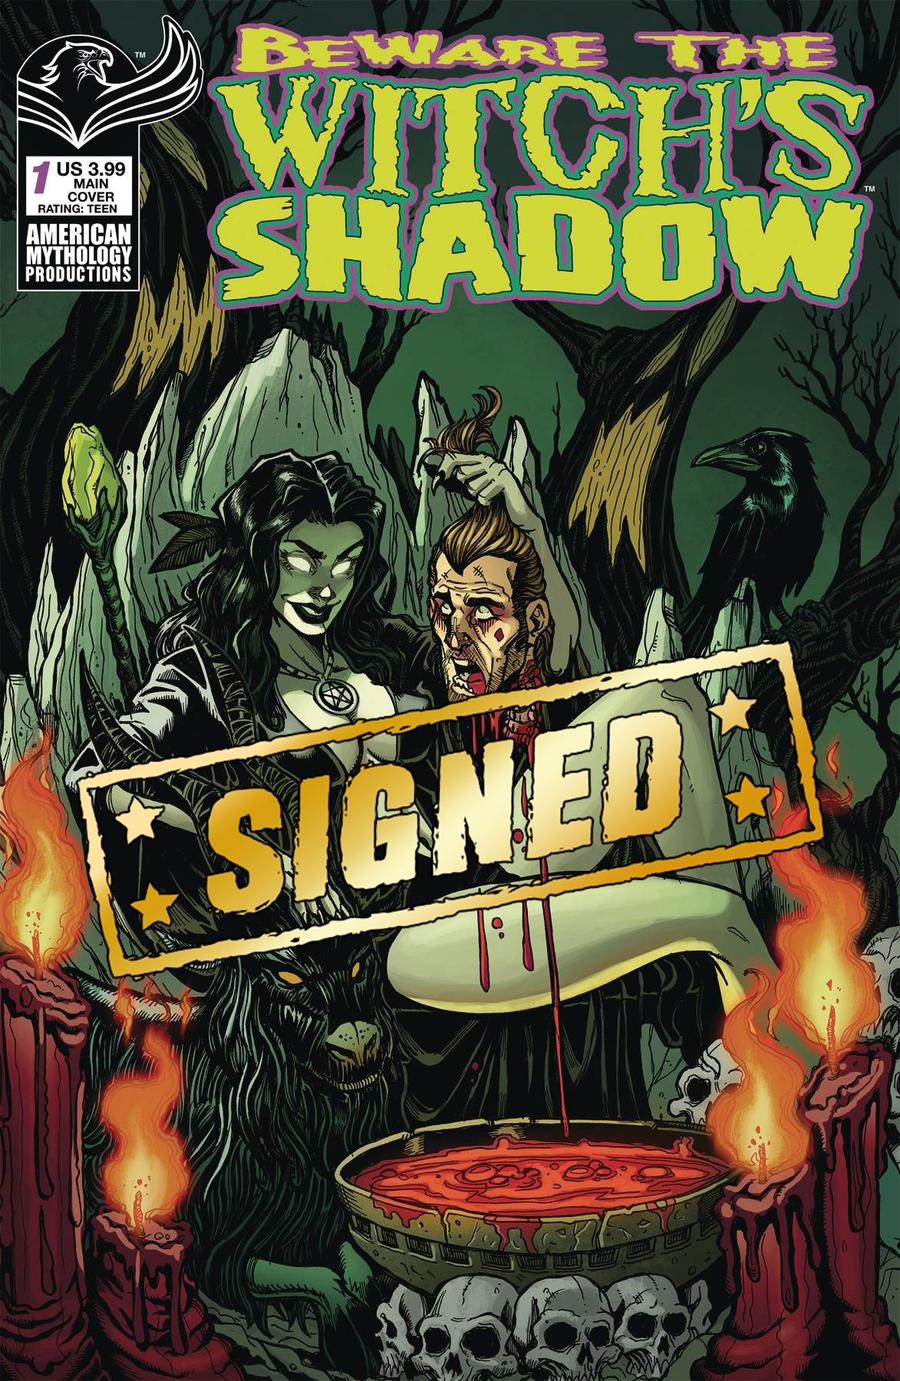 Beware The Witchs Shadow #1 Cover E Regular Puis Calzada Cover Signed By James Kuhoric